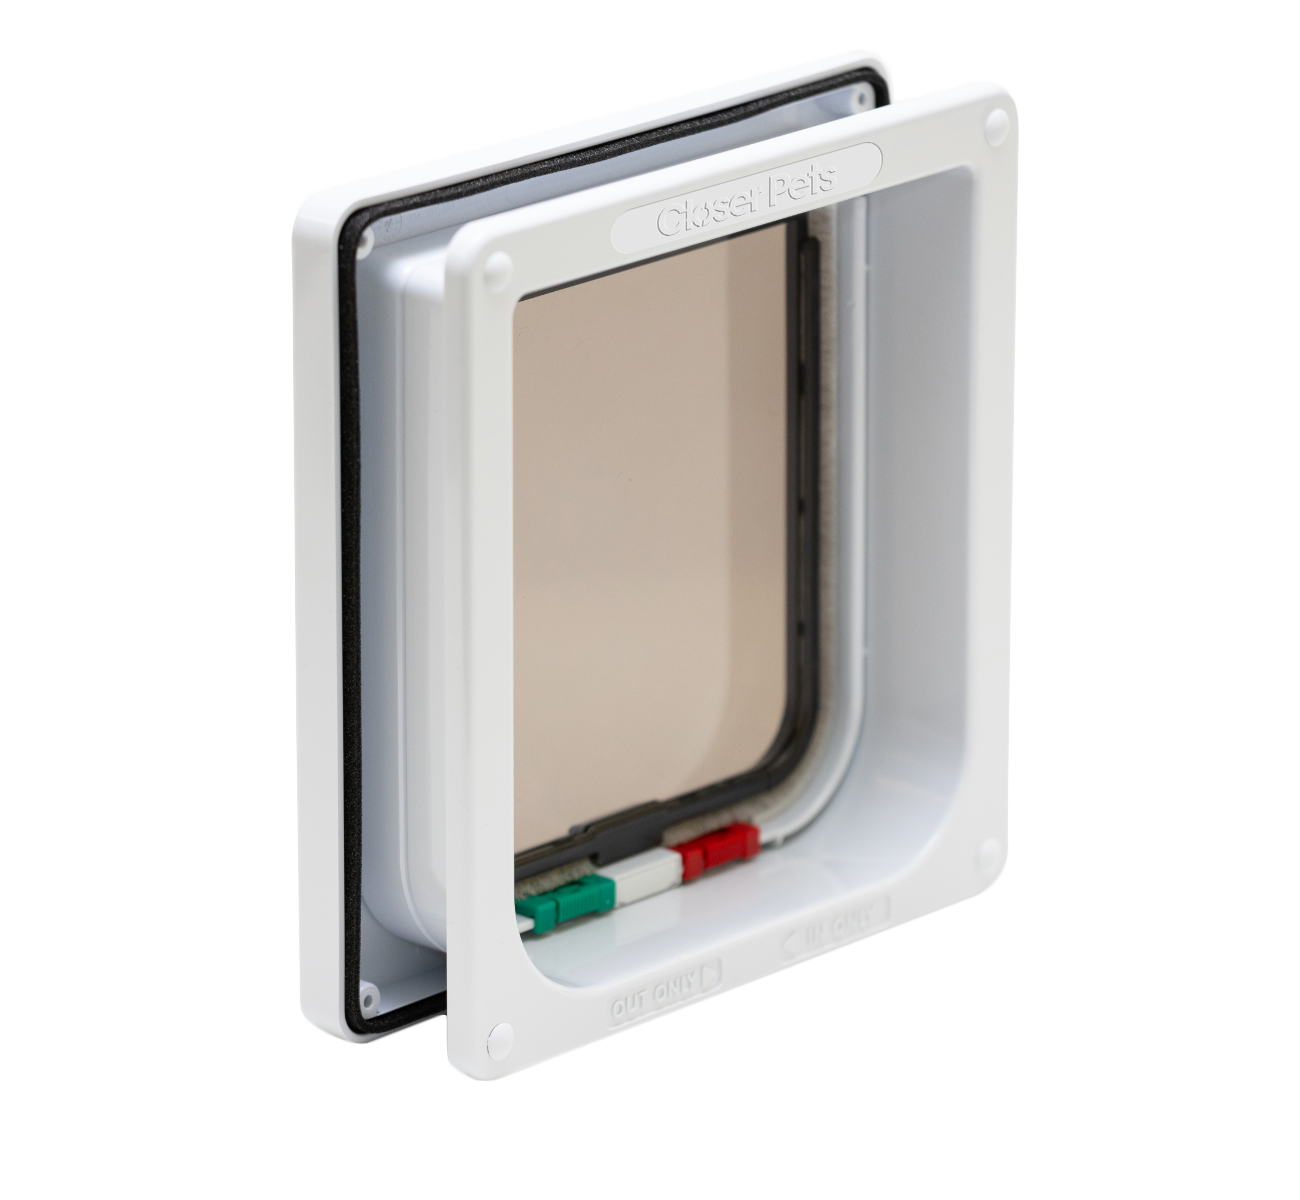 4-Way-Locking Cat Flap with Door Liner to 50mm (2 inches) – White (CP235W)